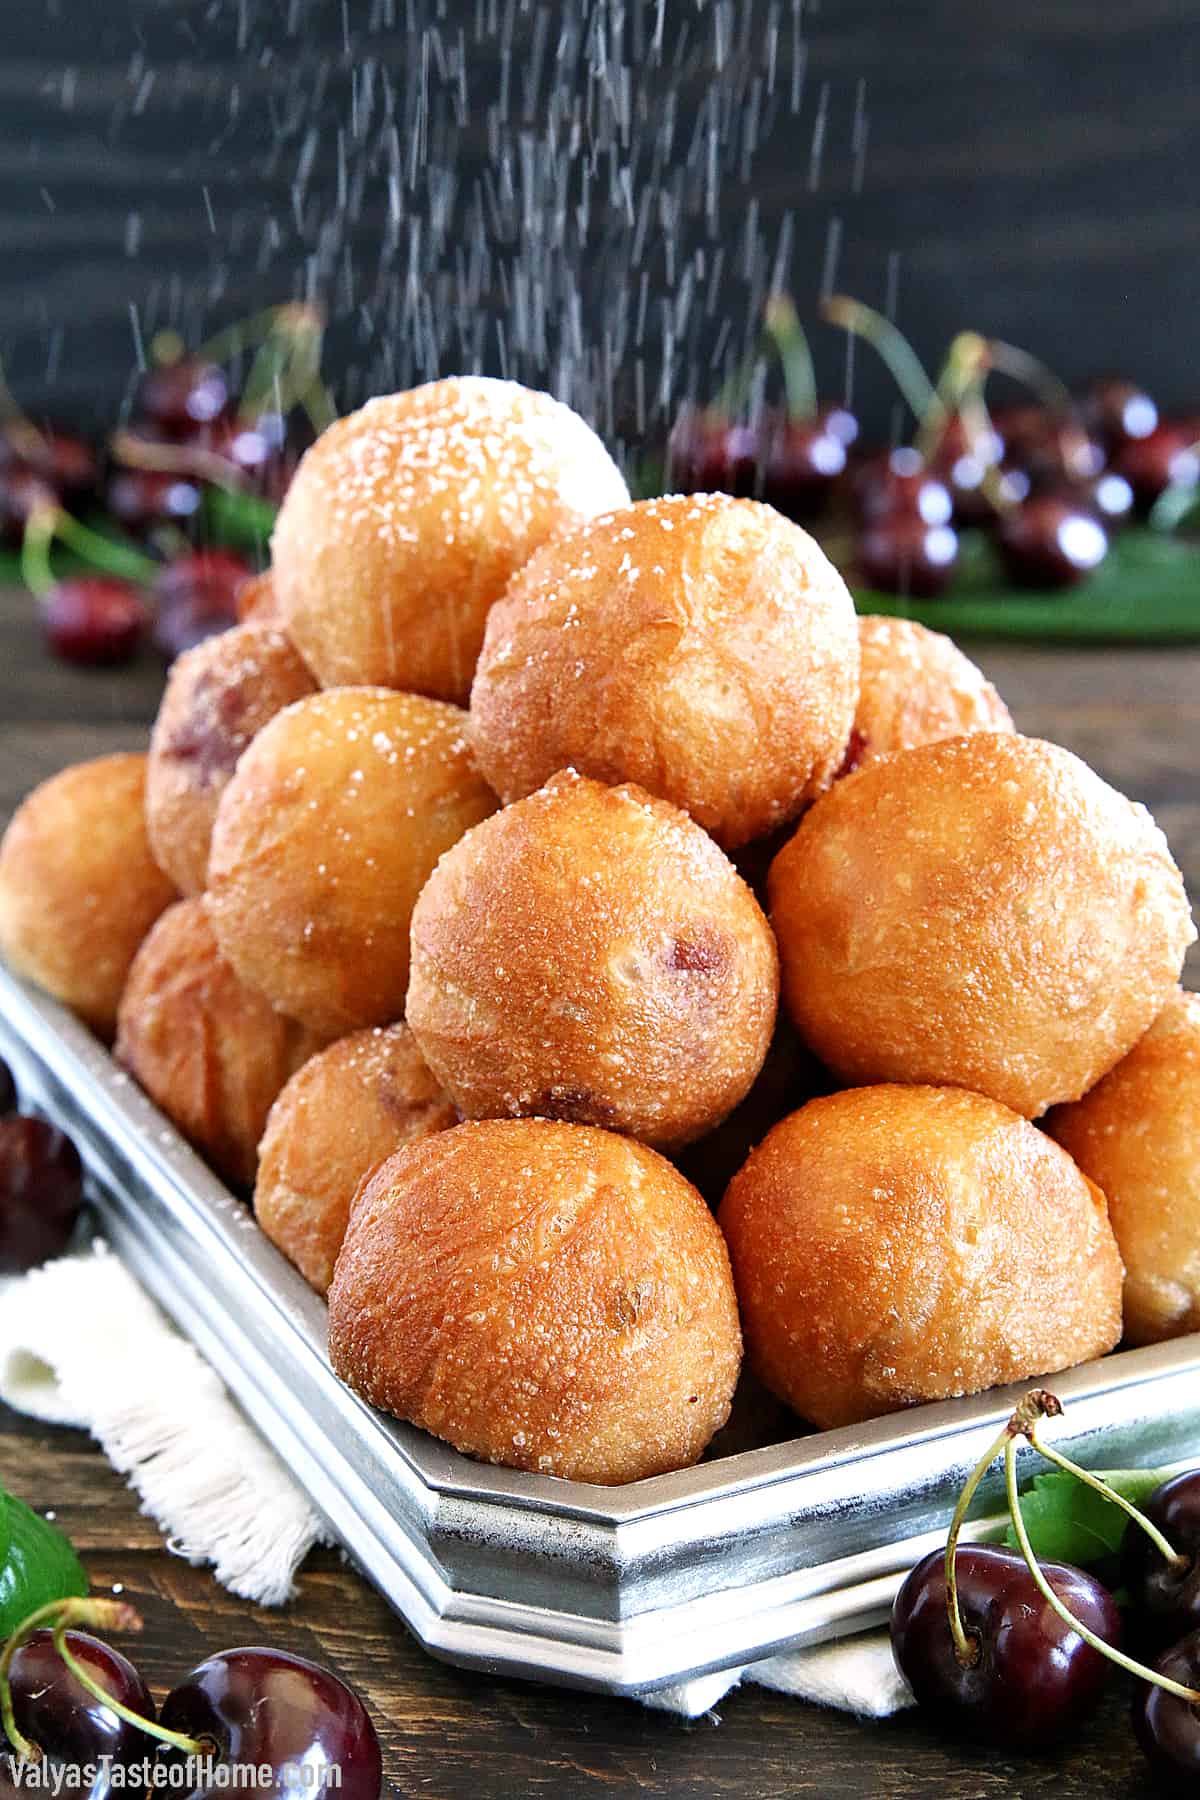 I'm not a big fan of frying and try to avoid it as much as possible. I have very few recipes that require frying. However, this Cherry Filled Donut Holes (Ponchiki) recipe is absolutely worth it.